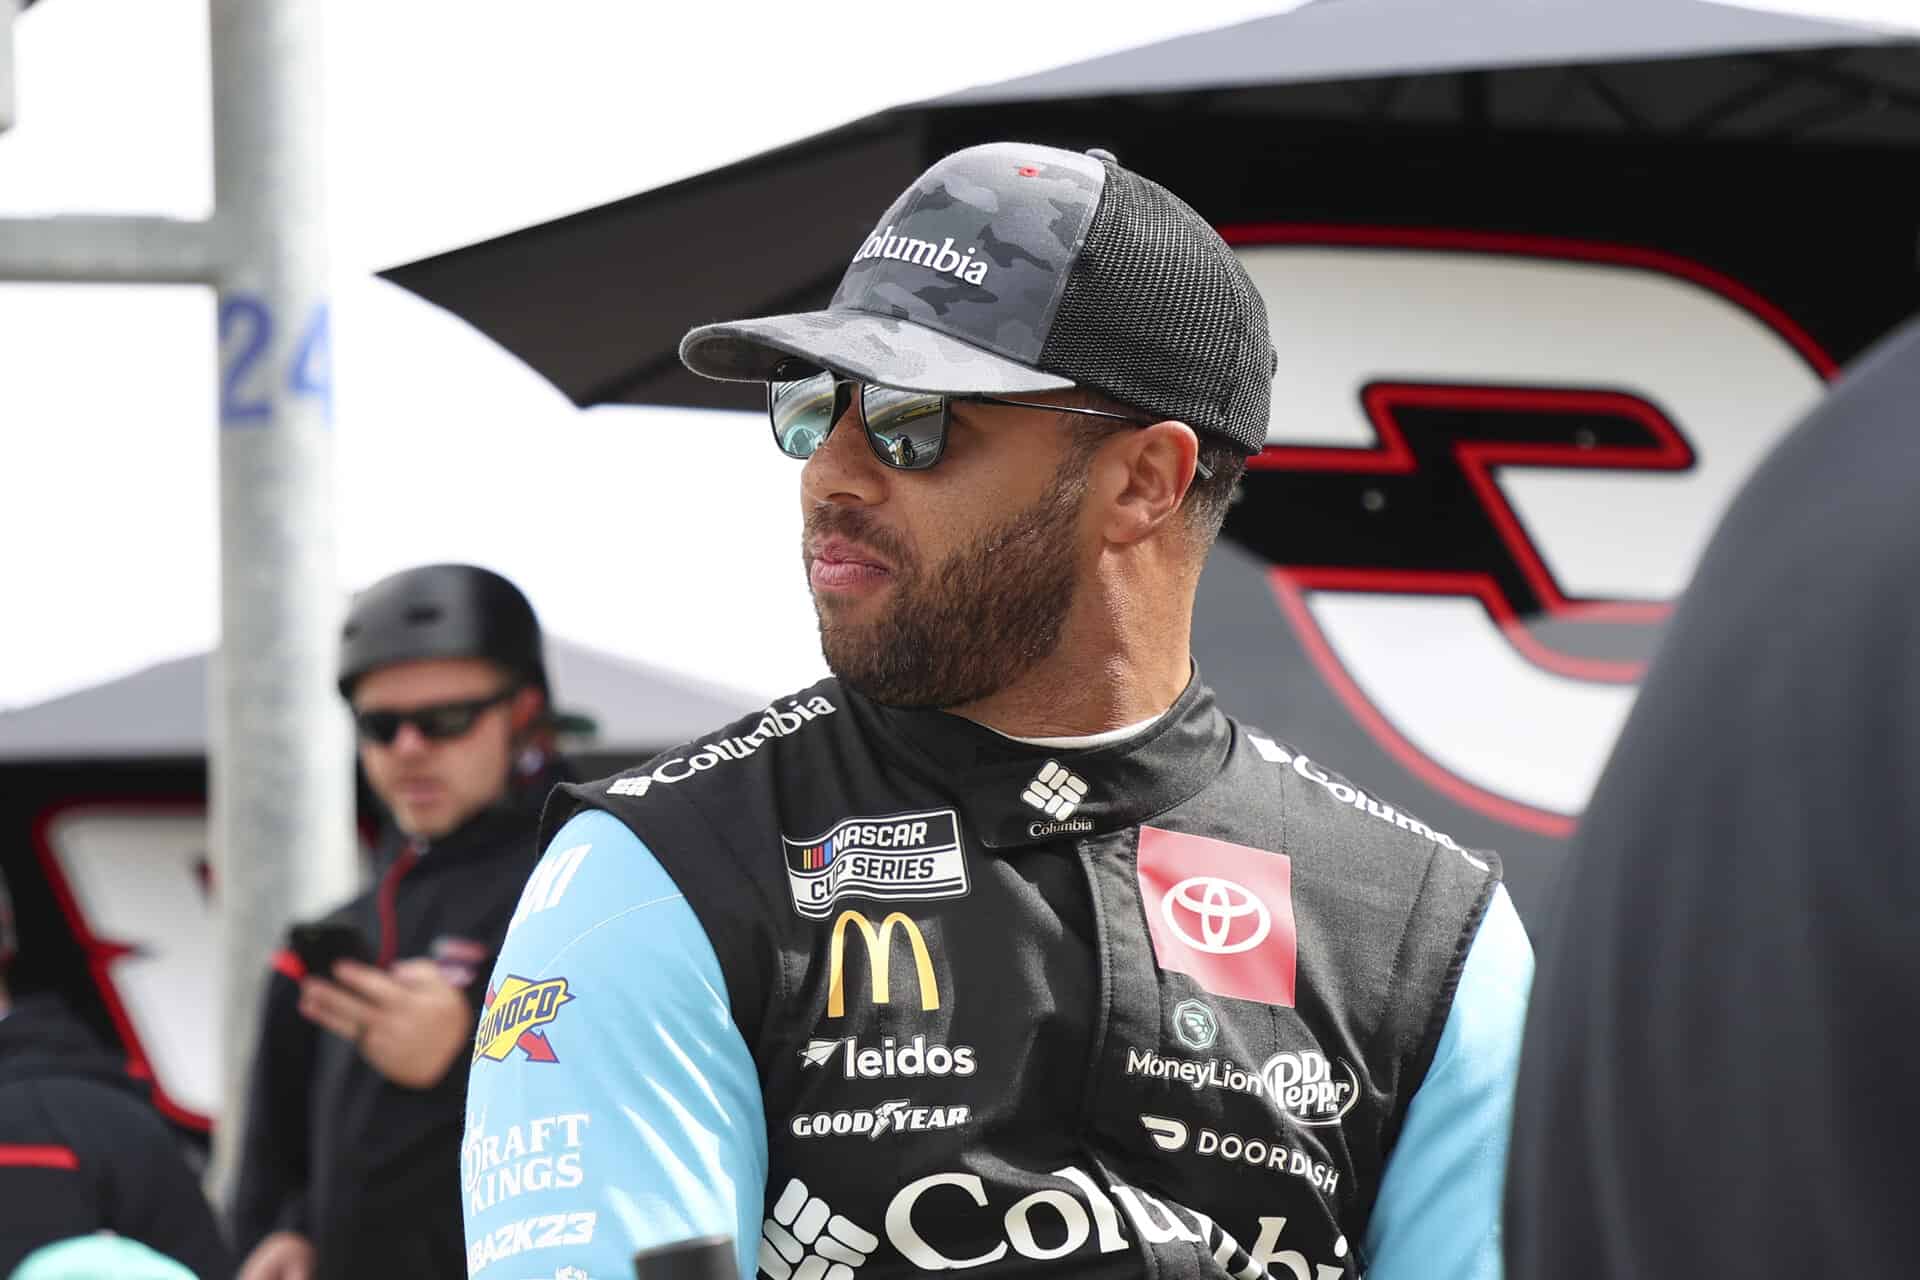 Bubba Wallace ended a rough patch for this 23XI Racing team with a top-five finish in the NASCAR Cup Series race at Las Vegas Motor Speedway.